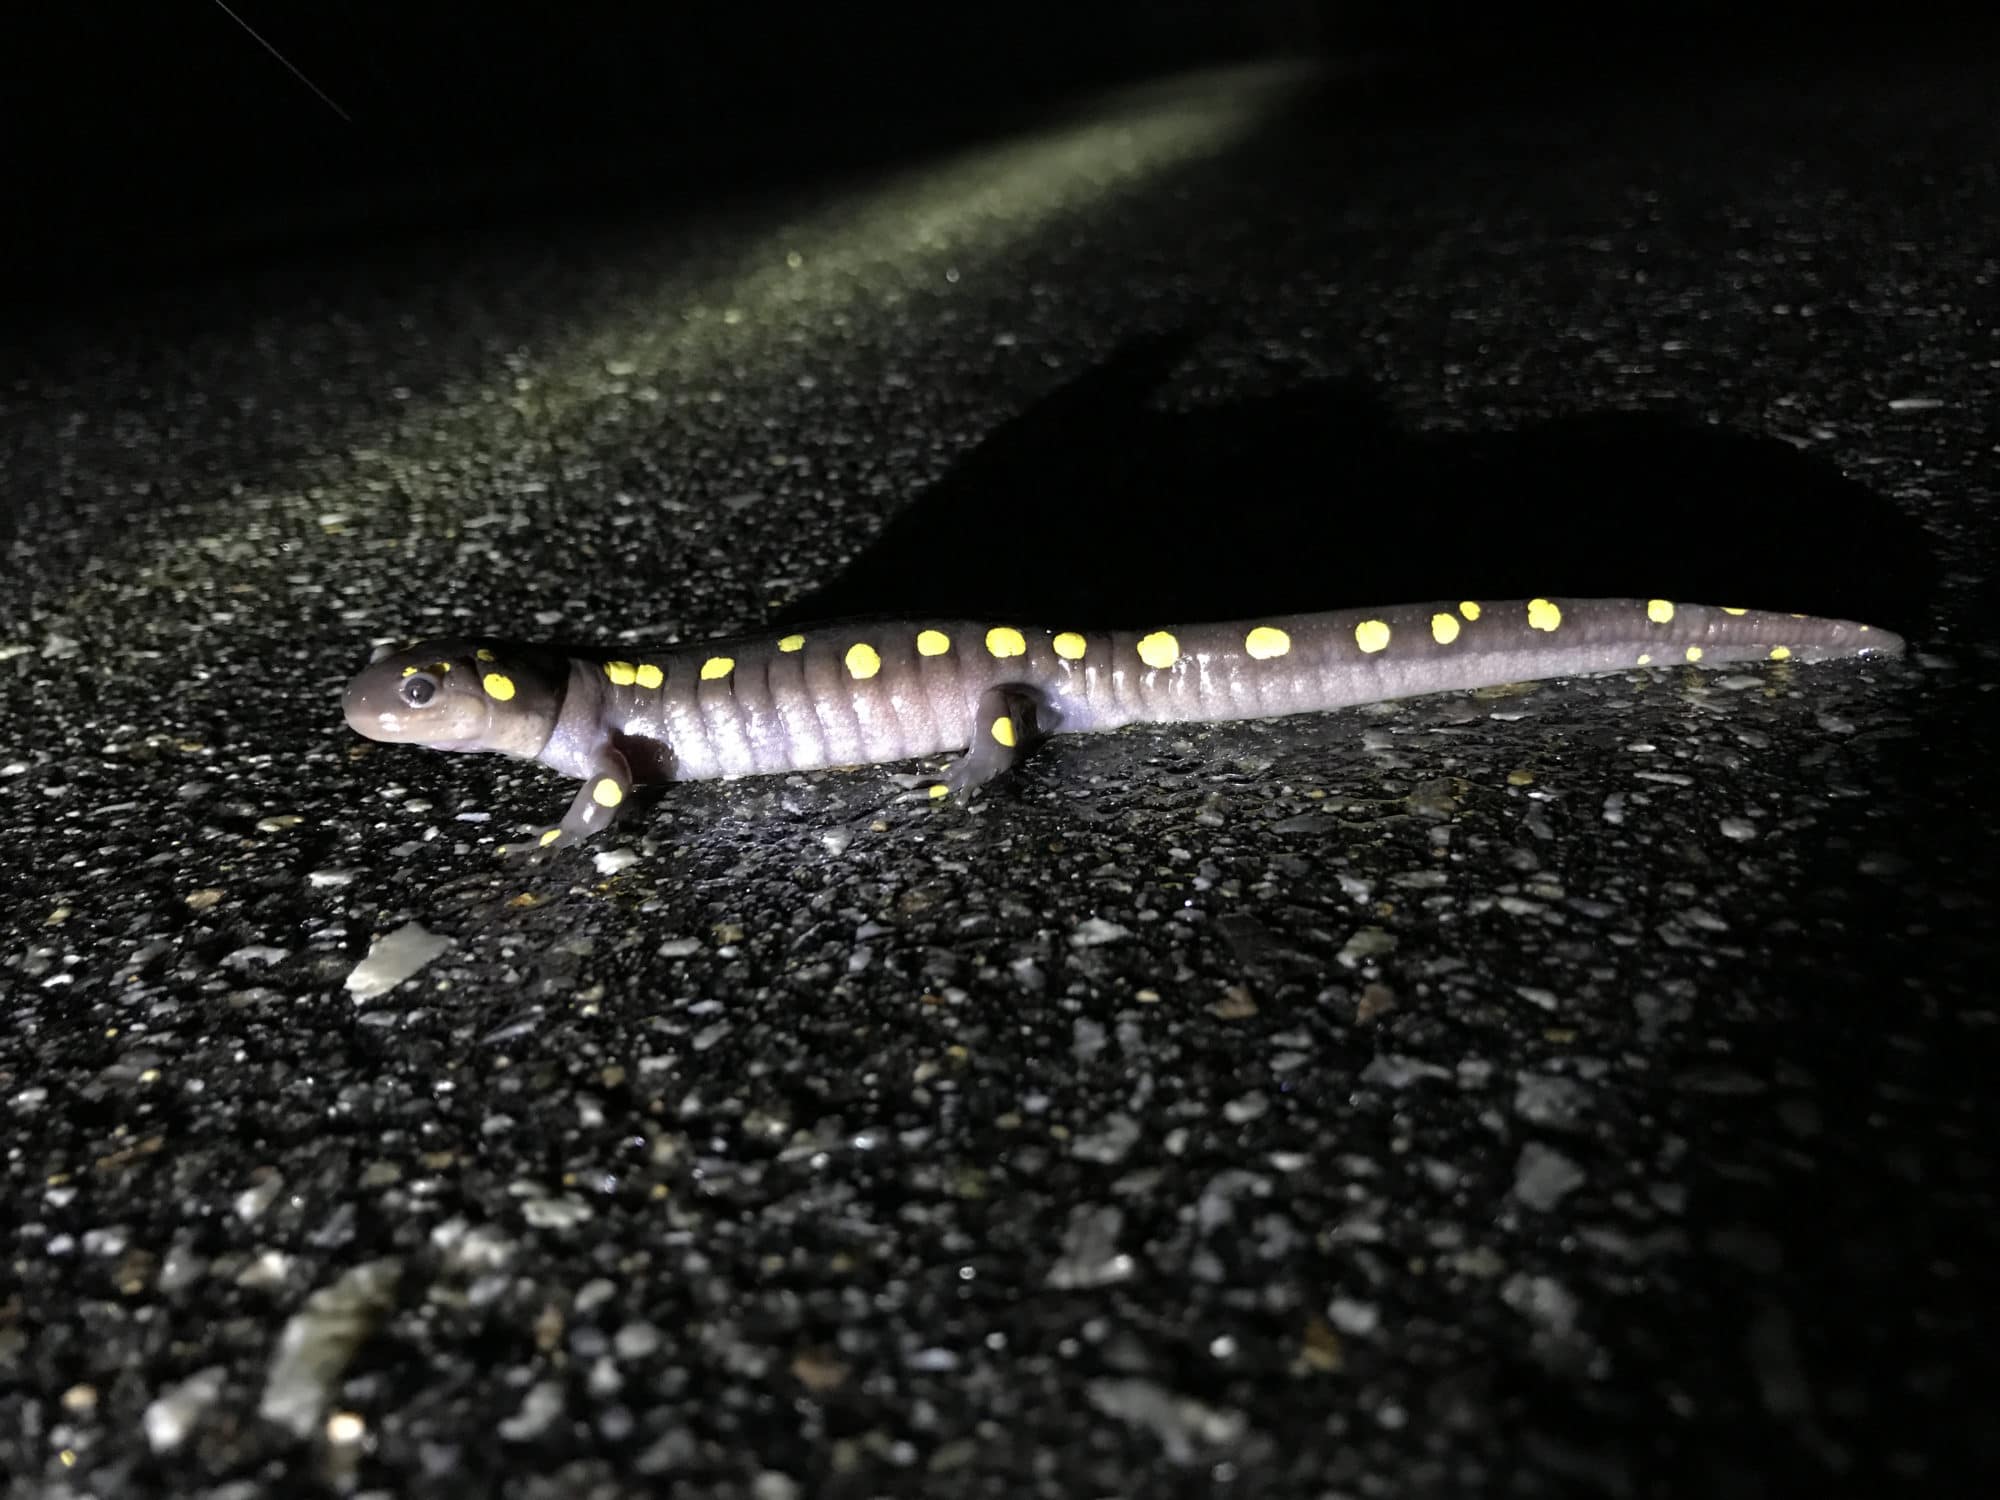 A spotted salamander crosses the road. (photo © Brett Amy Thelen)